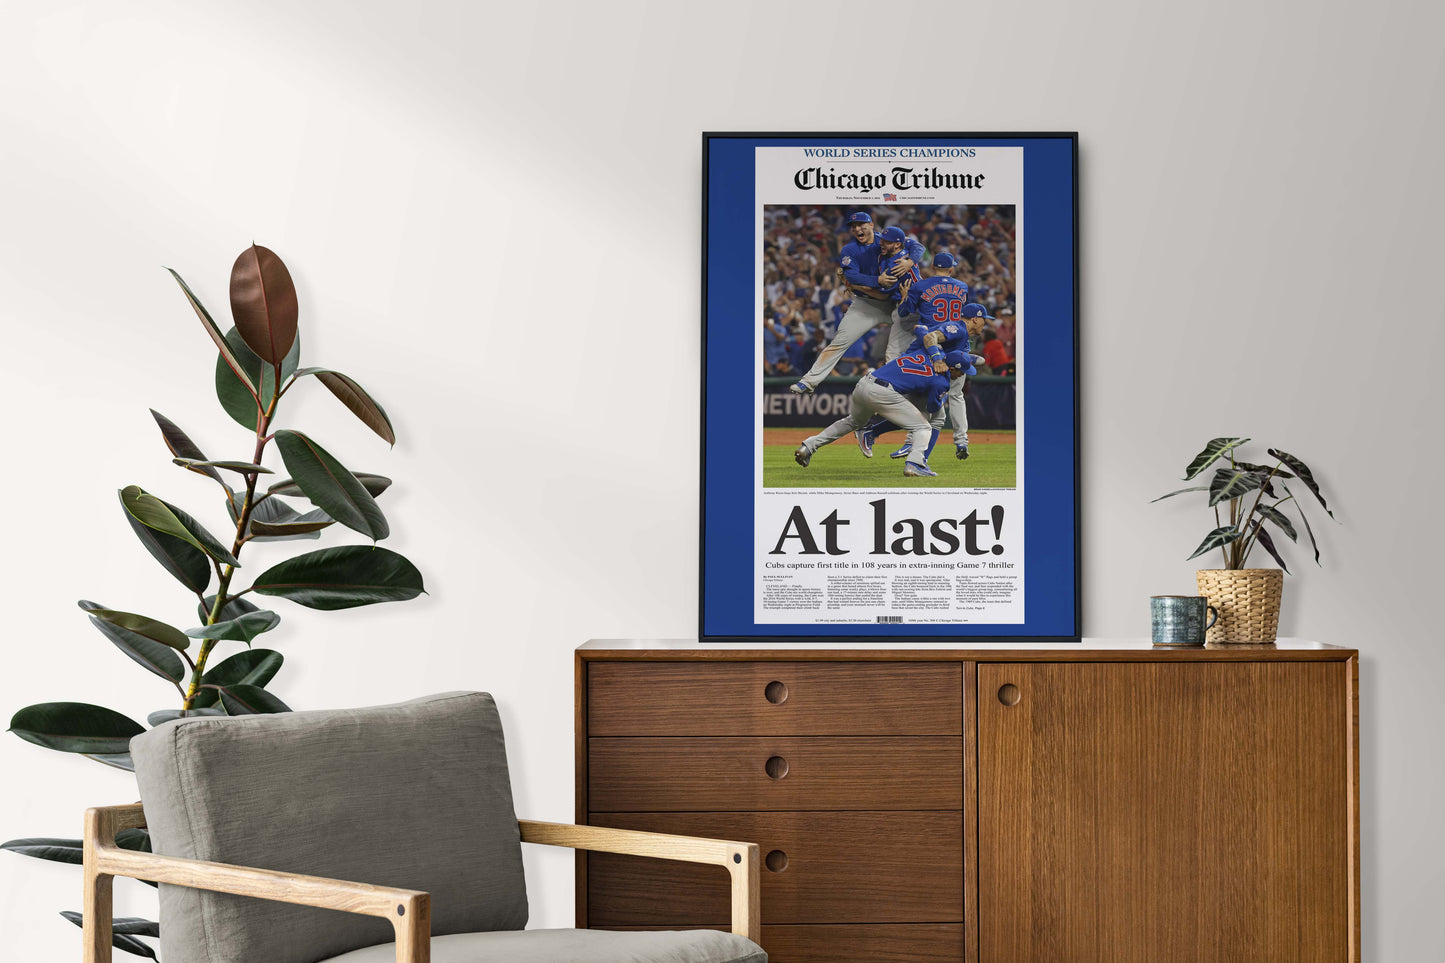 Chicago Cubs 2016 World Series MLB Champions Front Cover Chicago Tribune Newspaper Poster